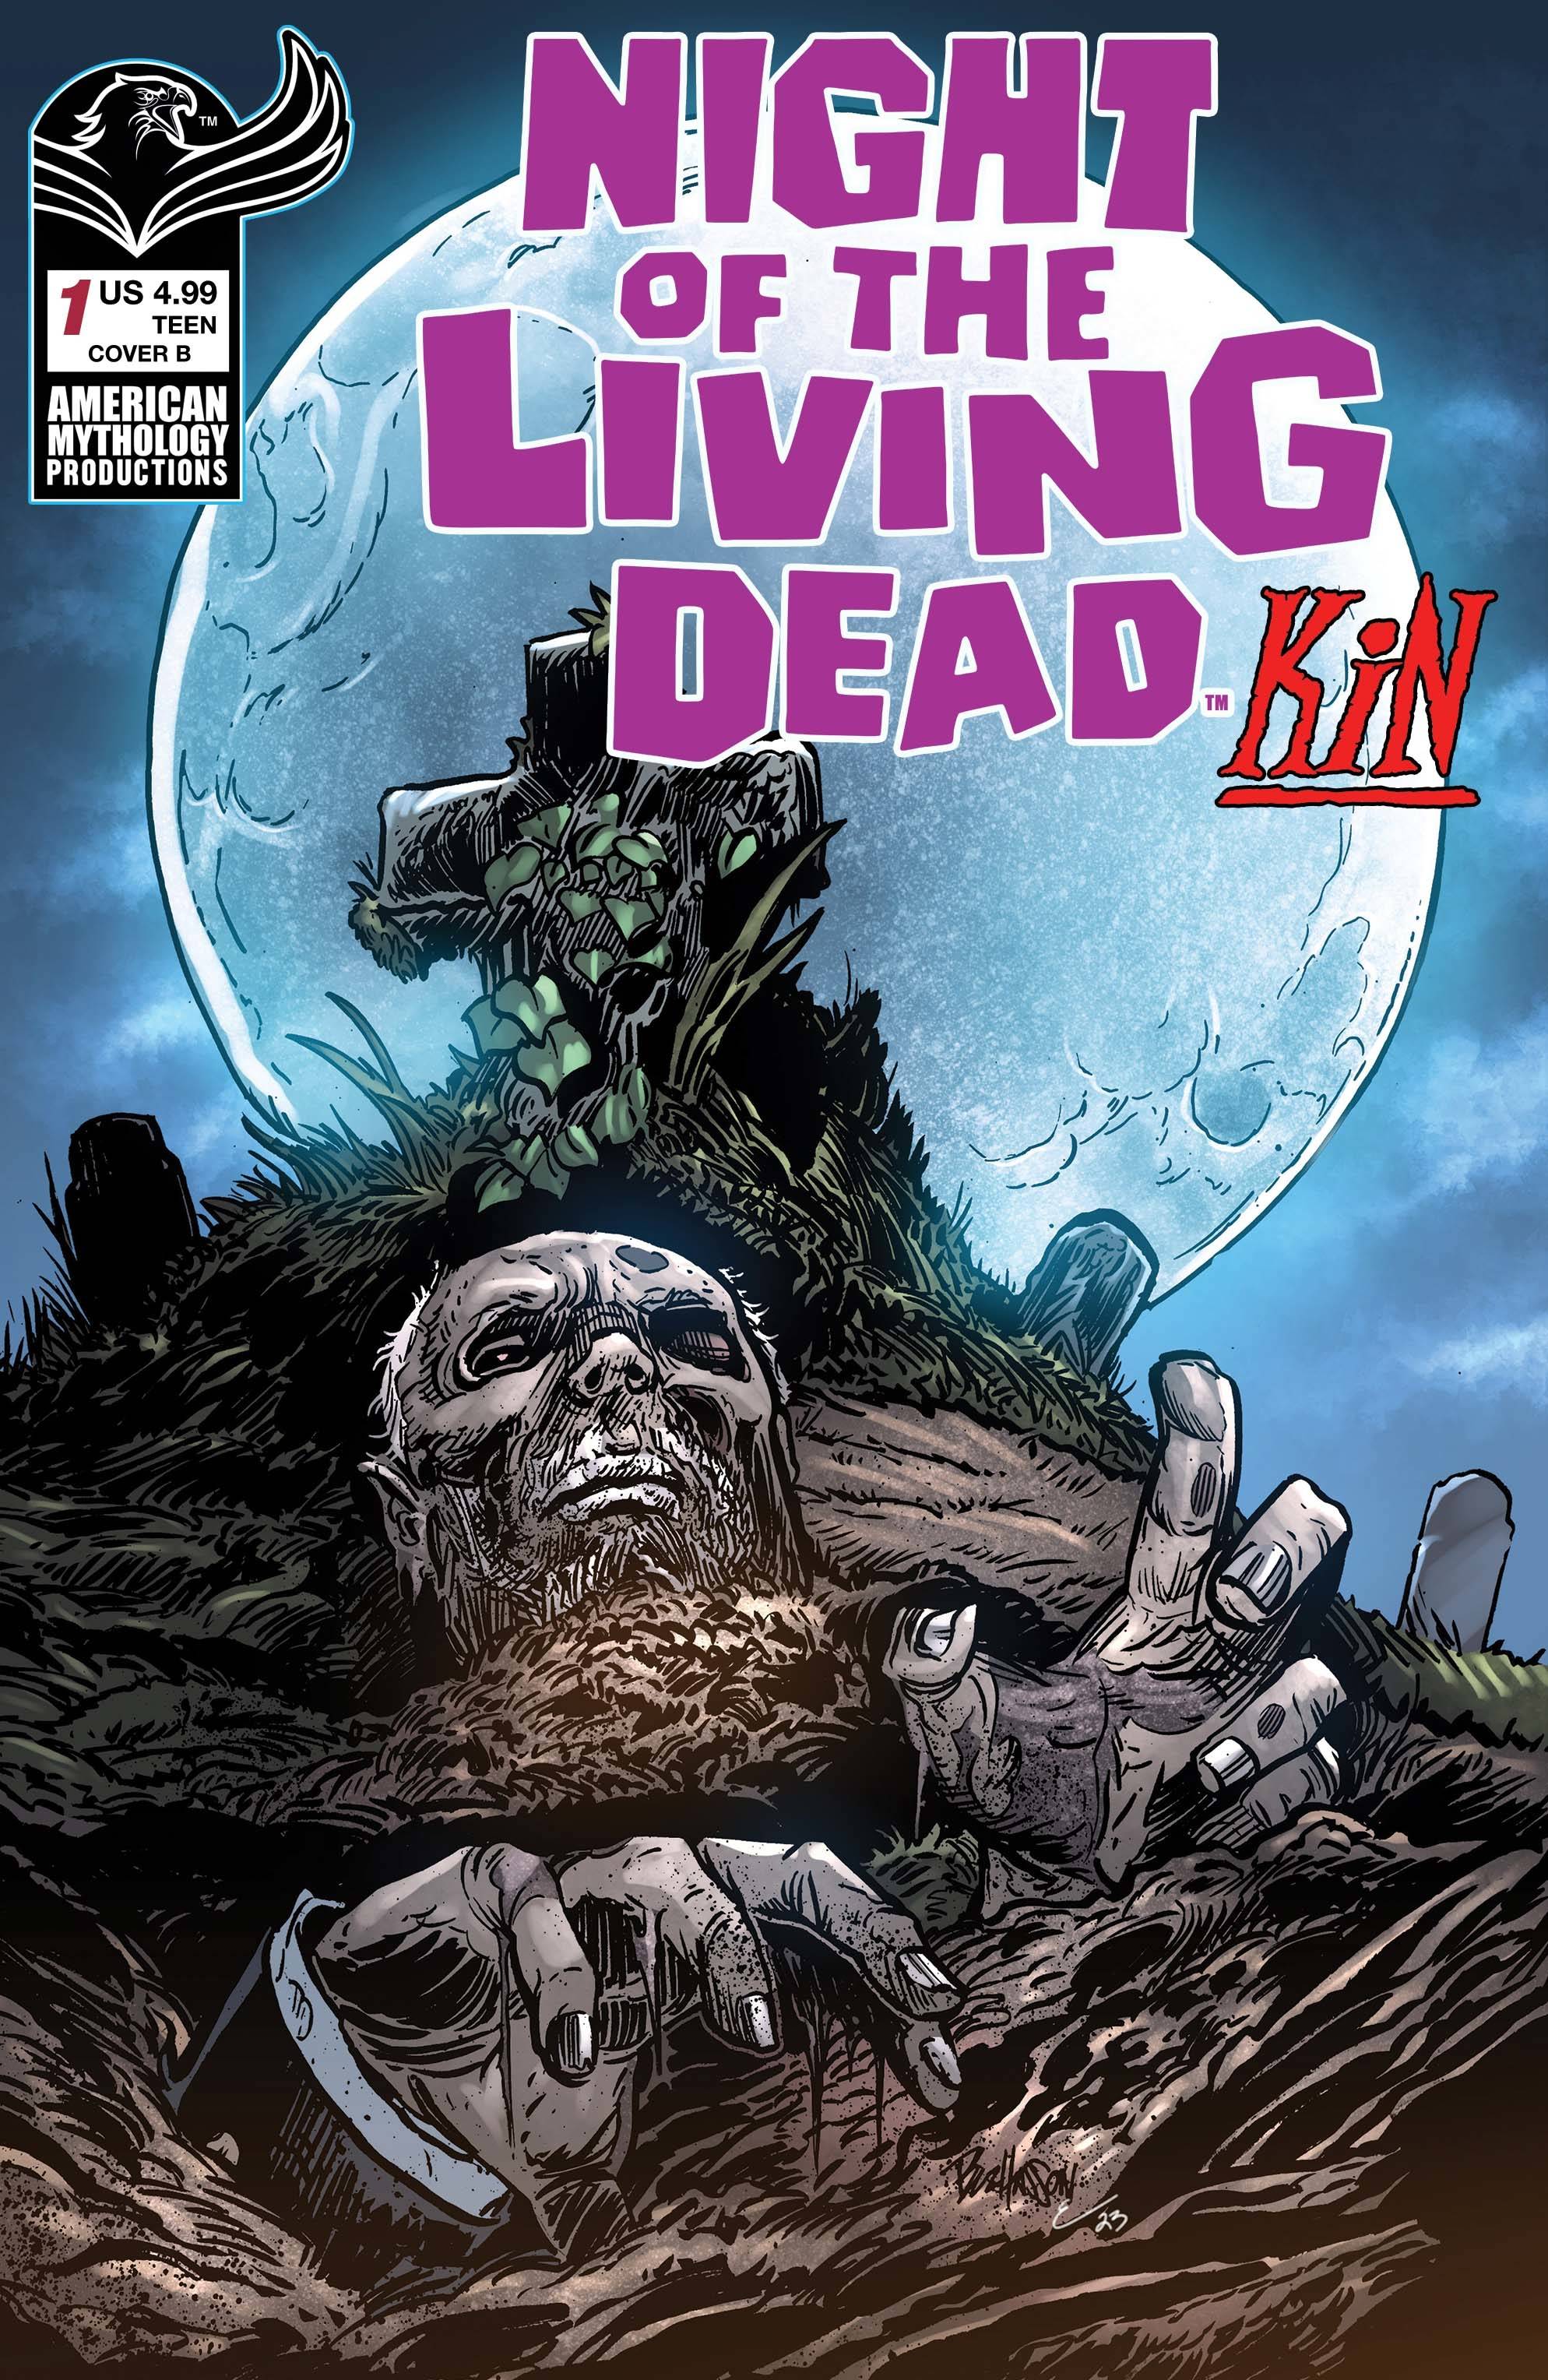 NIGHT OF THE LIVING DEAD KIN #1 CVR B HASSON OUT OF GRAVE (O